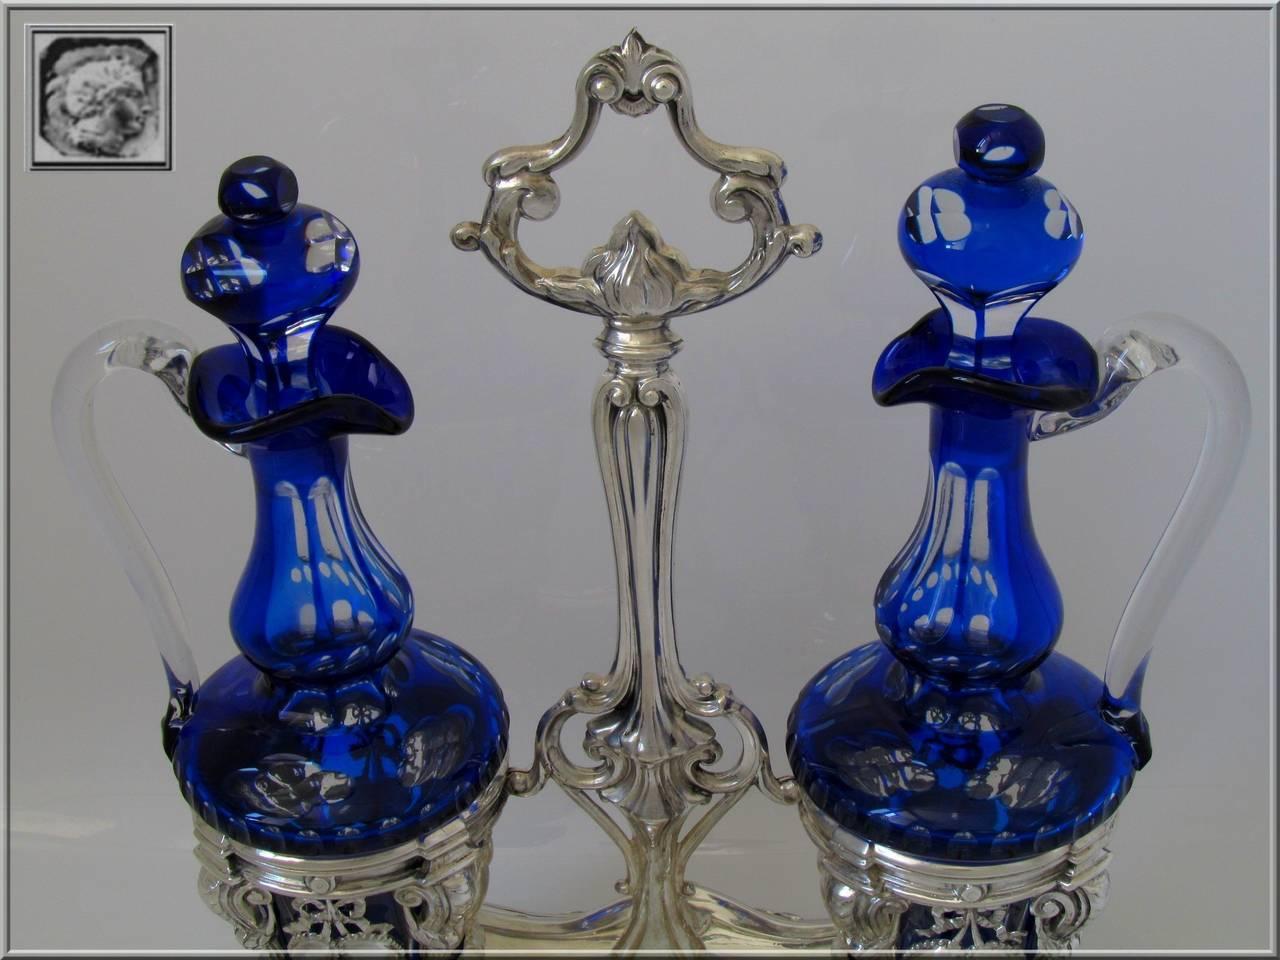 Imposing French sterling silver oil and vinegar cruet set, Baccarat cobalt blue, Louis XVI decoration.

Head of Minerve 1 st titre for 950/1000 French sterling silver guarantee.

Imposing measure:
12"2 (31 cm) height
10"1 x 6"1 (26 cm